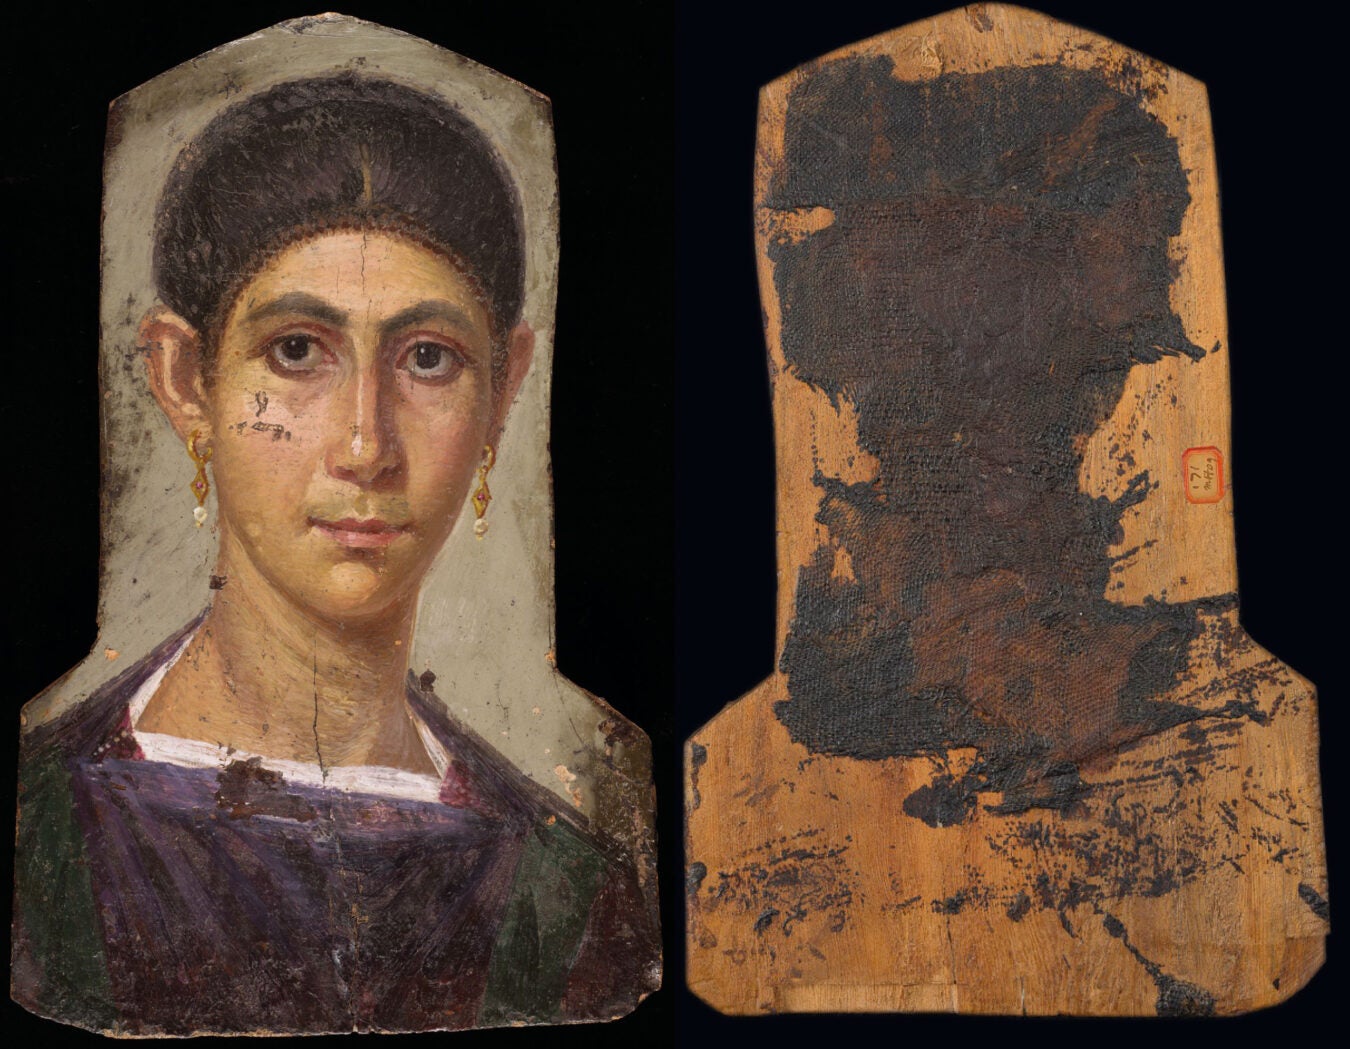 Portrait of a woman in normal light next to back of back panel showing resin and linen remnants. This highly naturalistic mummy portrait depicts a young woman with deep brown eyes, arched brows, and a long pointed nose. Her dark hair is pulled back with only a row of small curls framing her forehead. Her jewelry is simple: small gold double-hooped earrings, each with a pendant pearl. She wears a deep purple tunic with green shoulder bands and maroon clasps all over a white undergarment, visible only at the neckline.